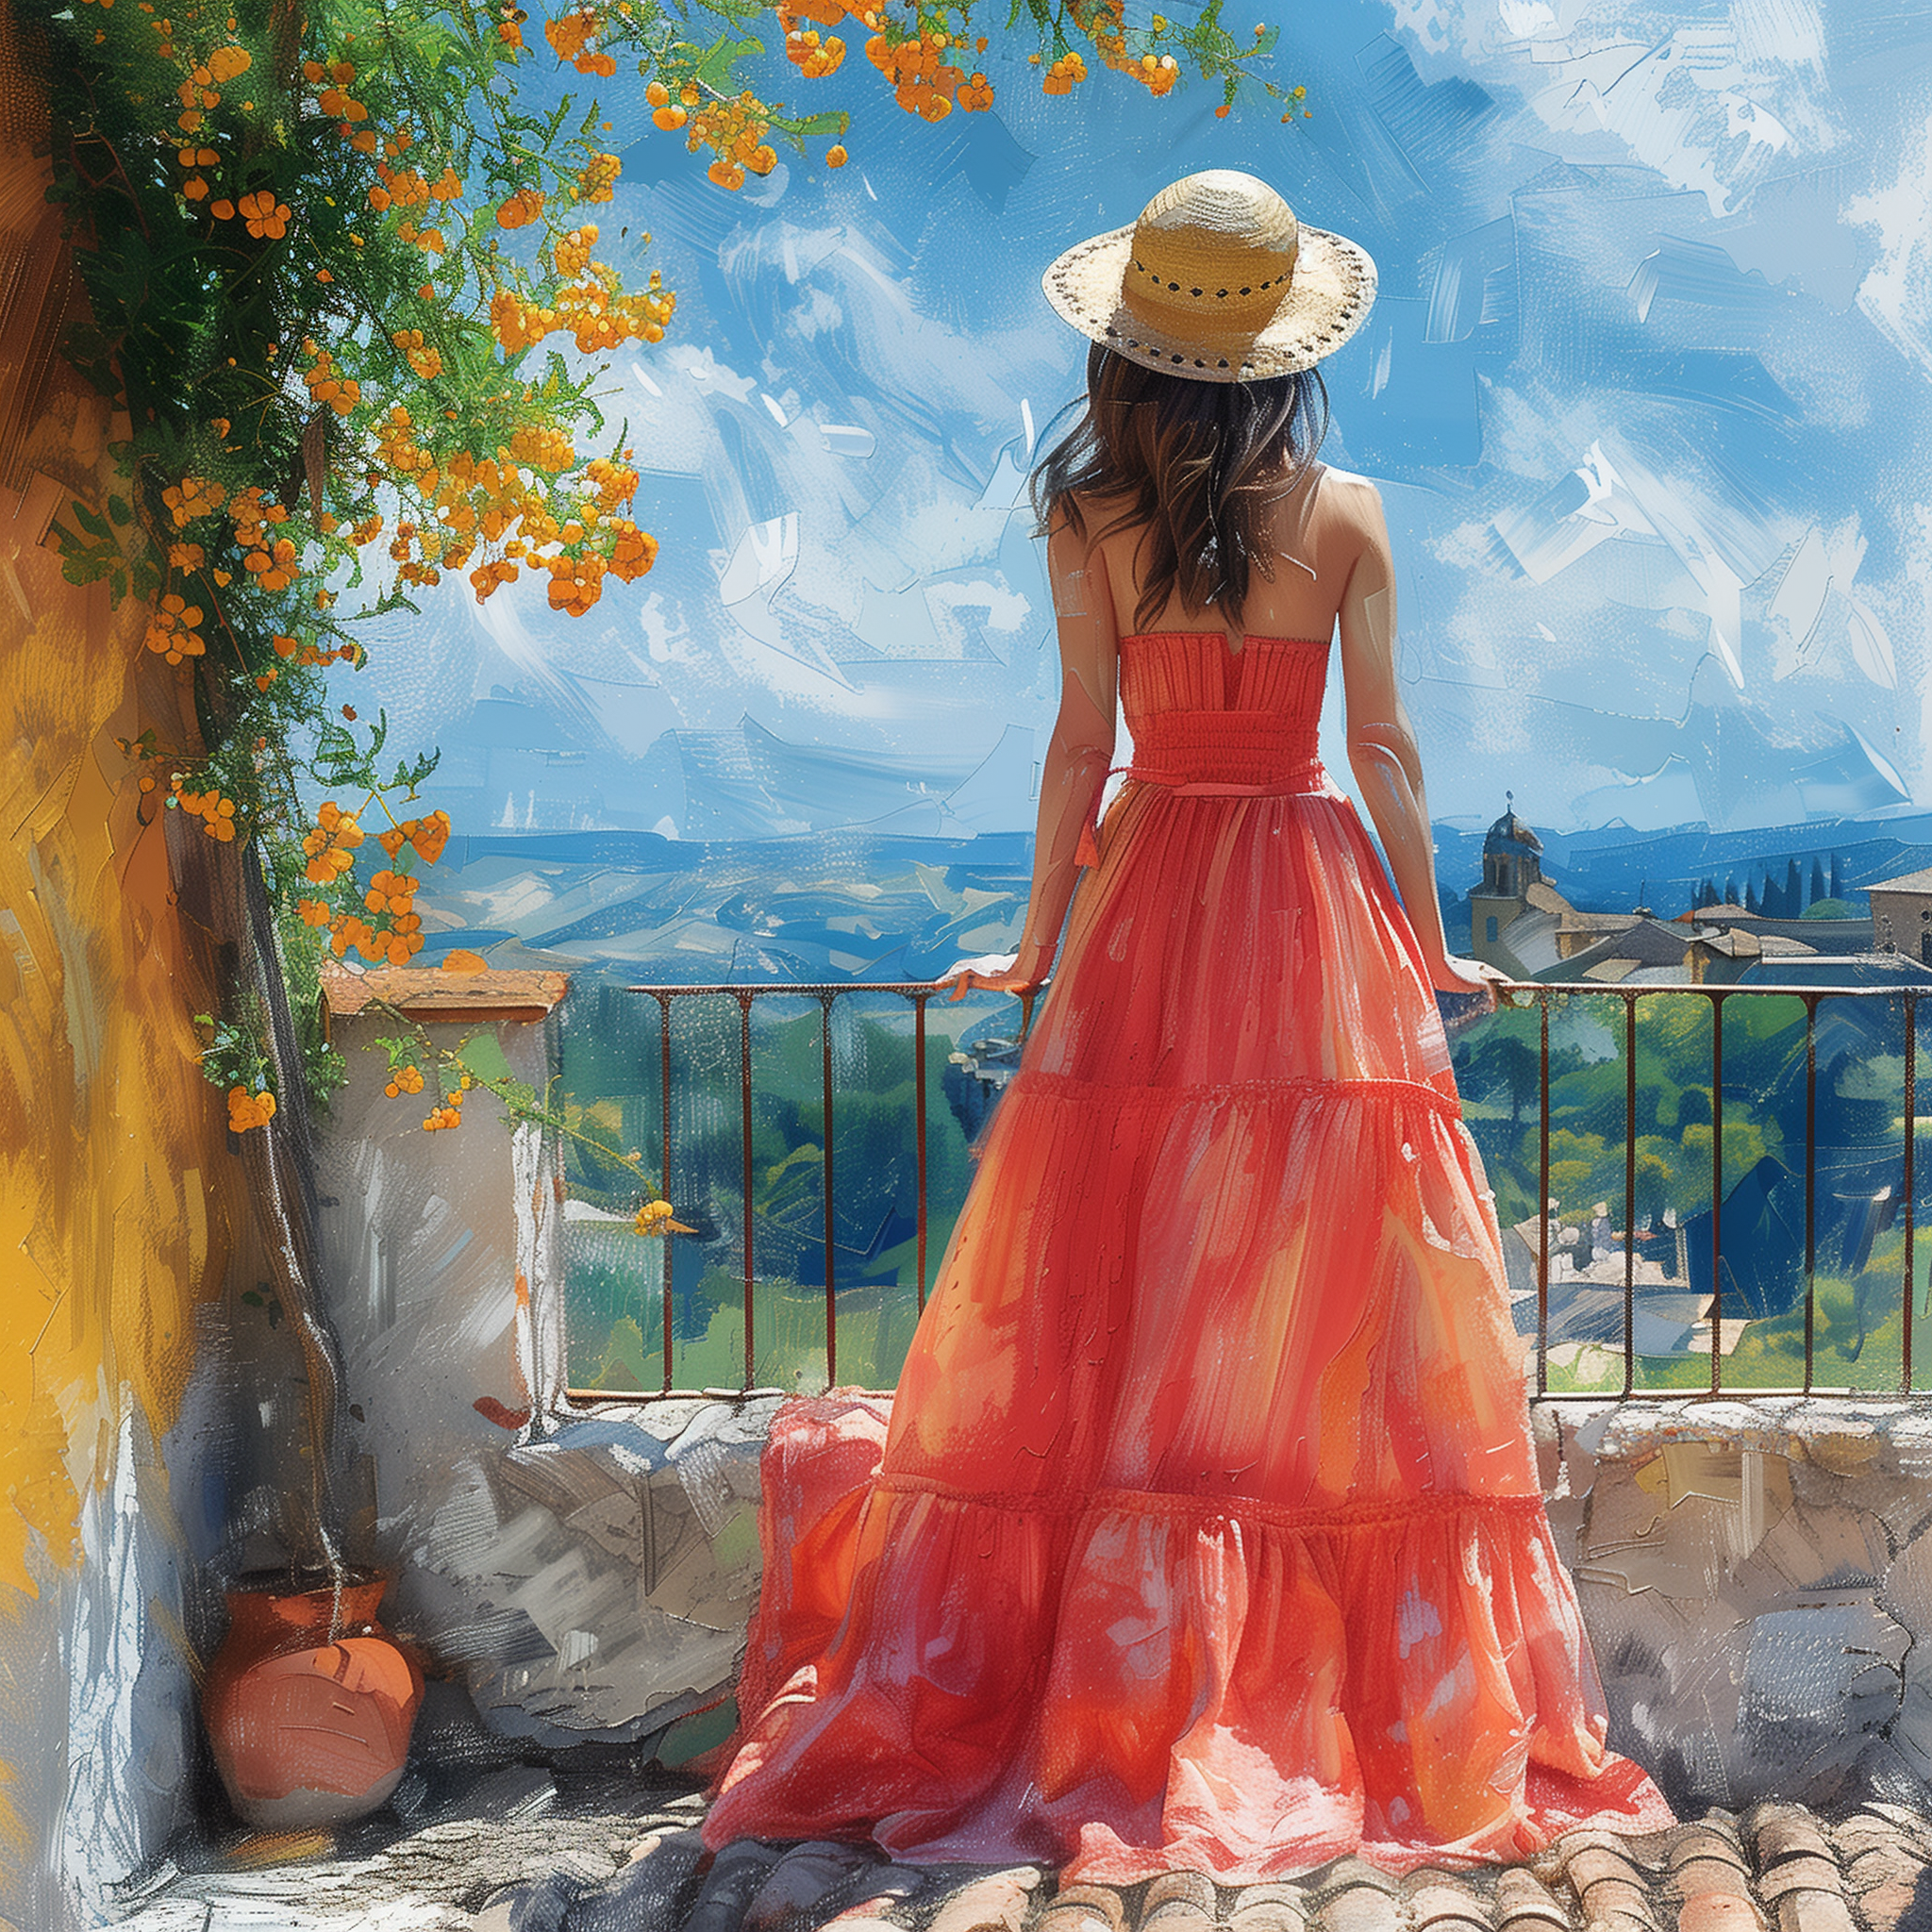 Woman in a red sundress and straw hat standing in a scenic environment, avatar image.